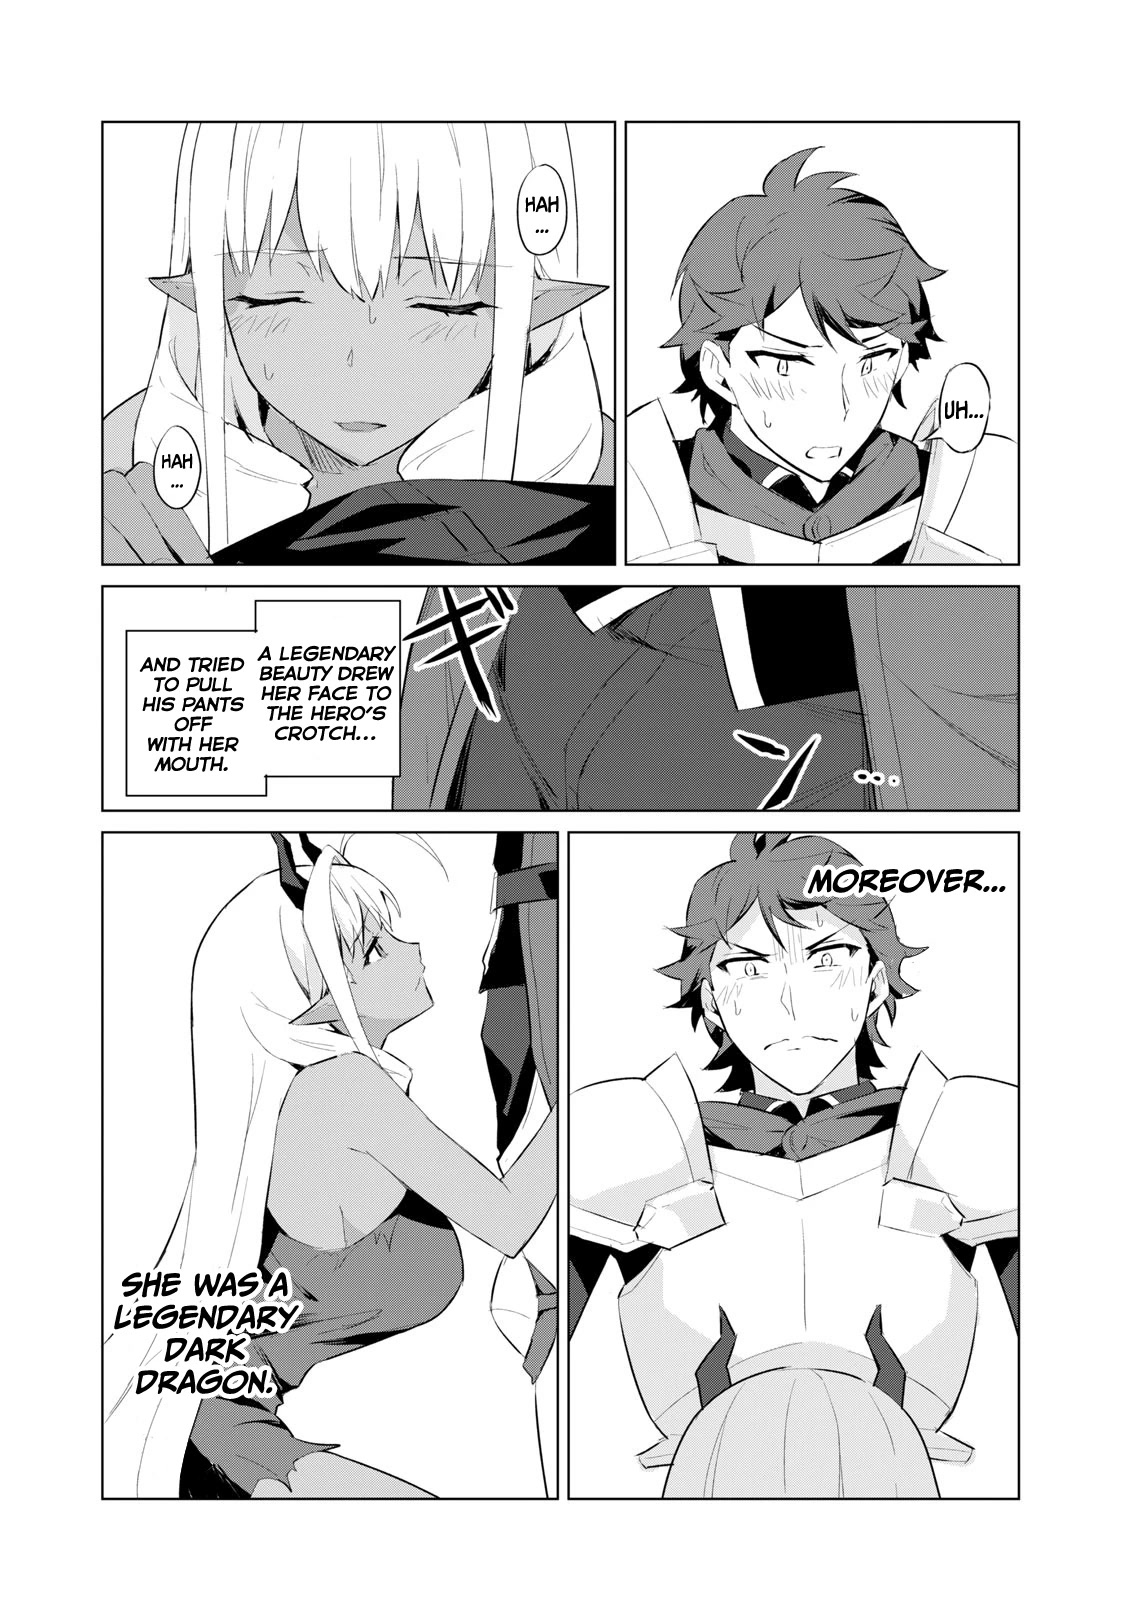 A Story About A Hero Exterminating A Dragon-Class Beautiful Girl Demon Queen, Who Has Very Low Self-Esteem, With Love! Chapter 1 #28